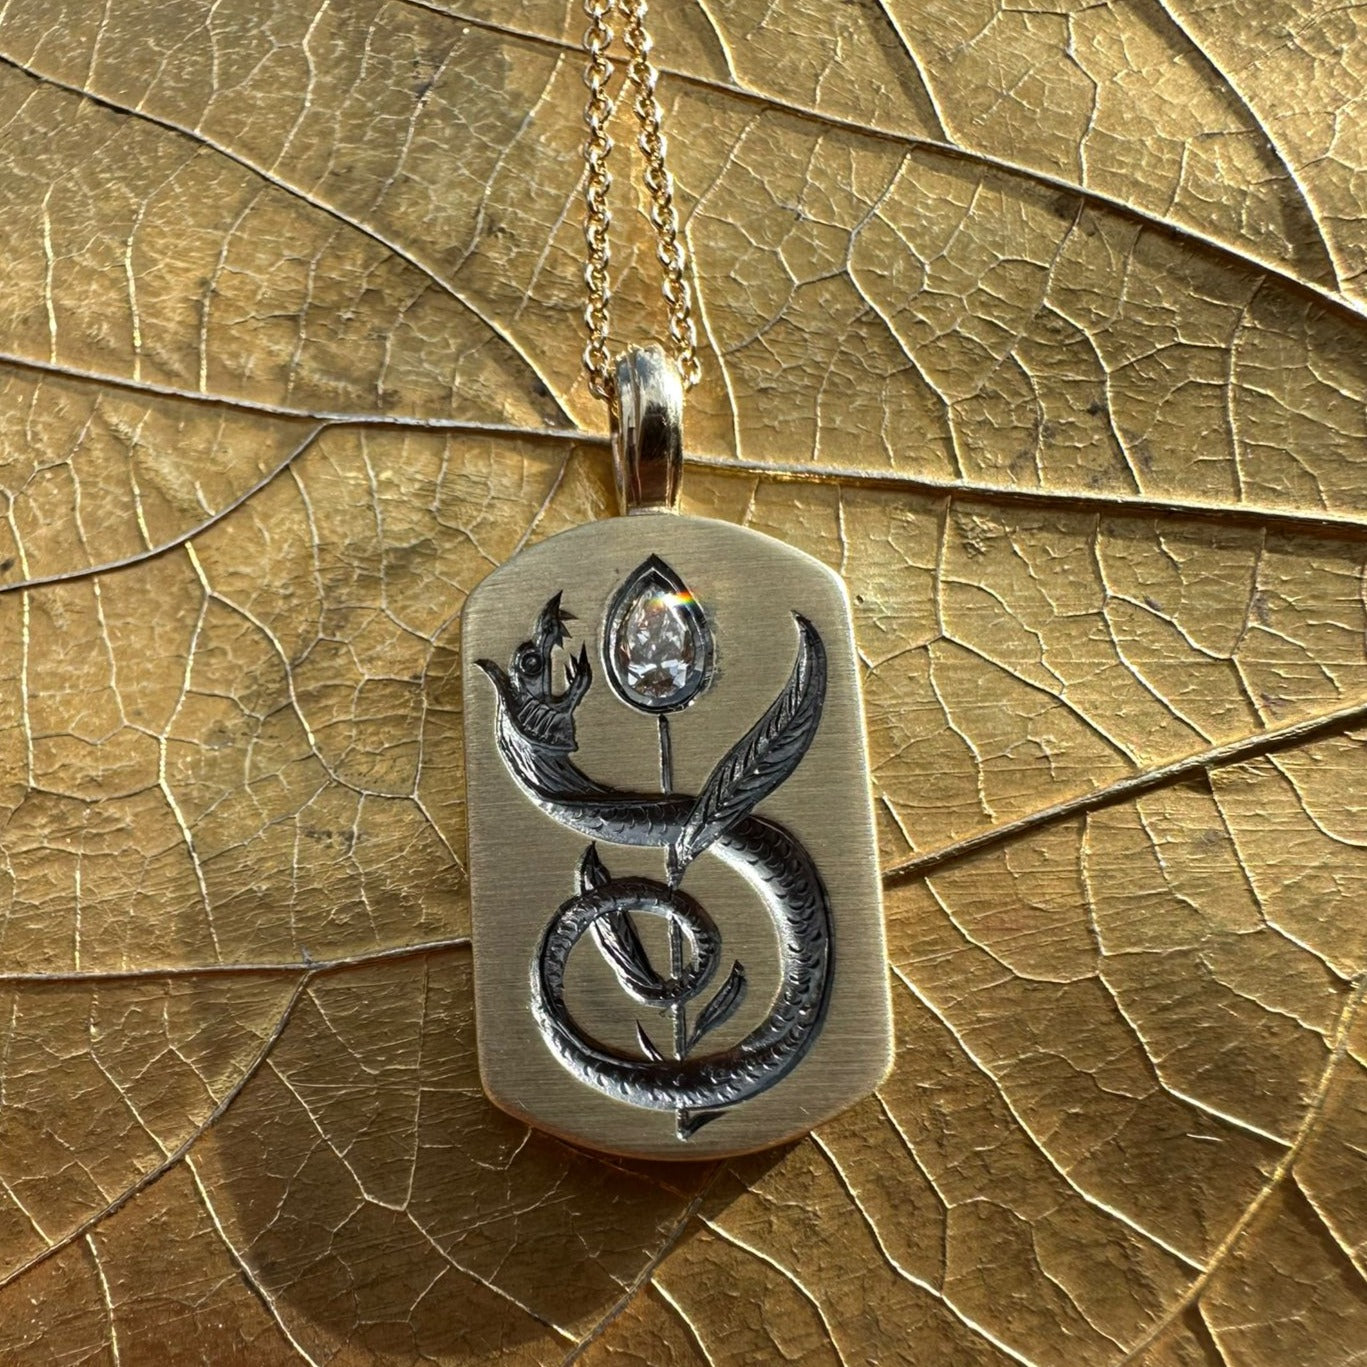 Castro Smith back of silver dog tag pendant engraved with a snake wrapped around a diamond flower. Hung on a silver chain.